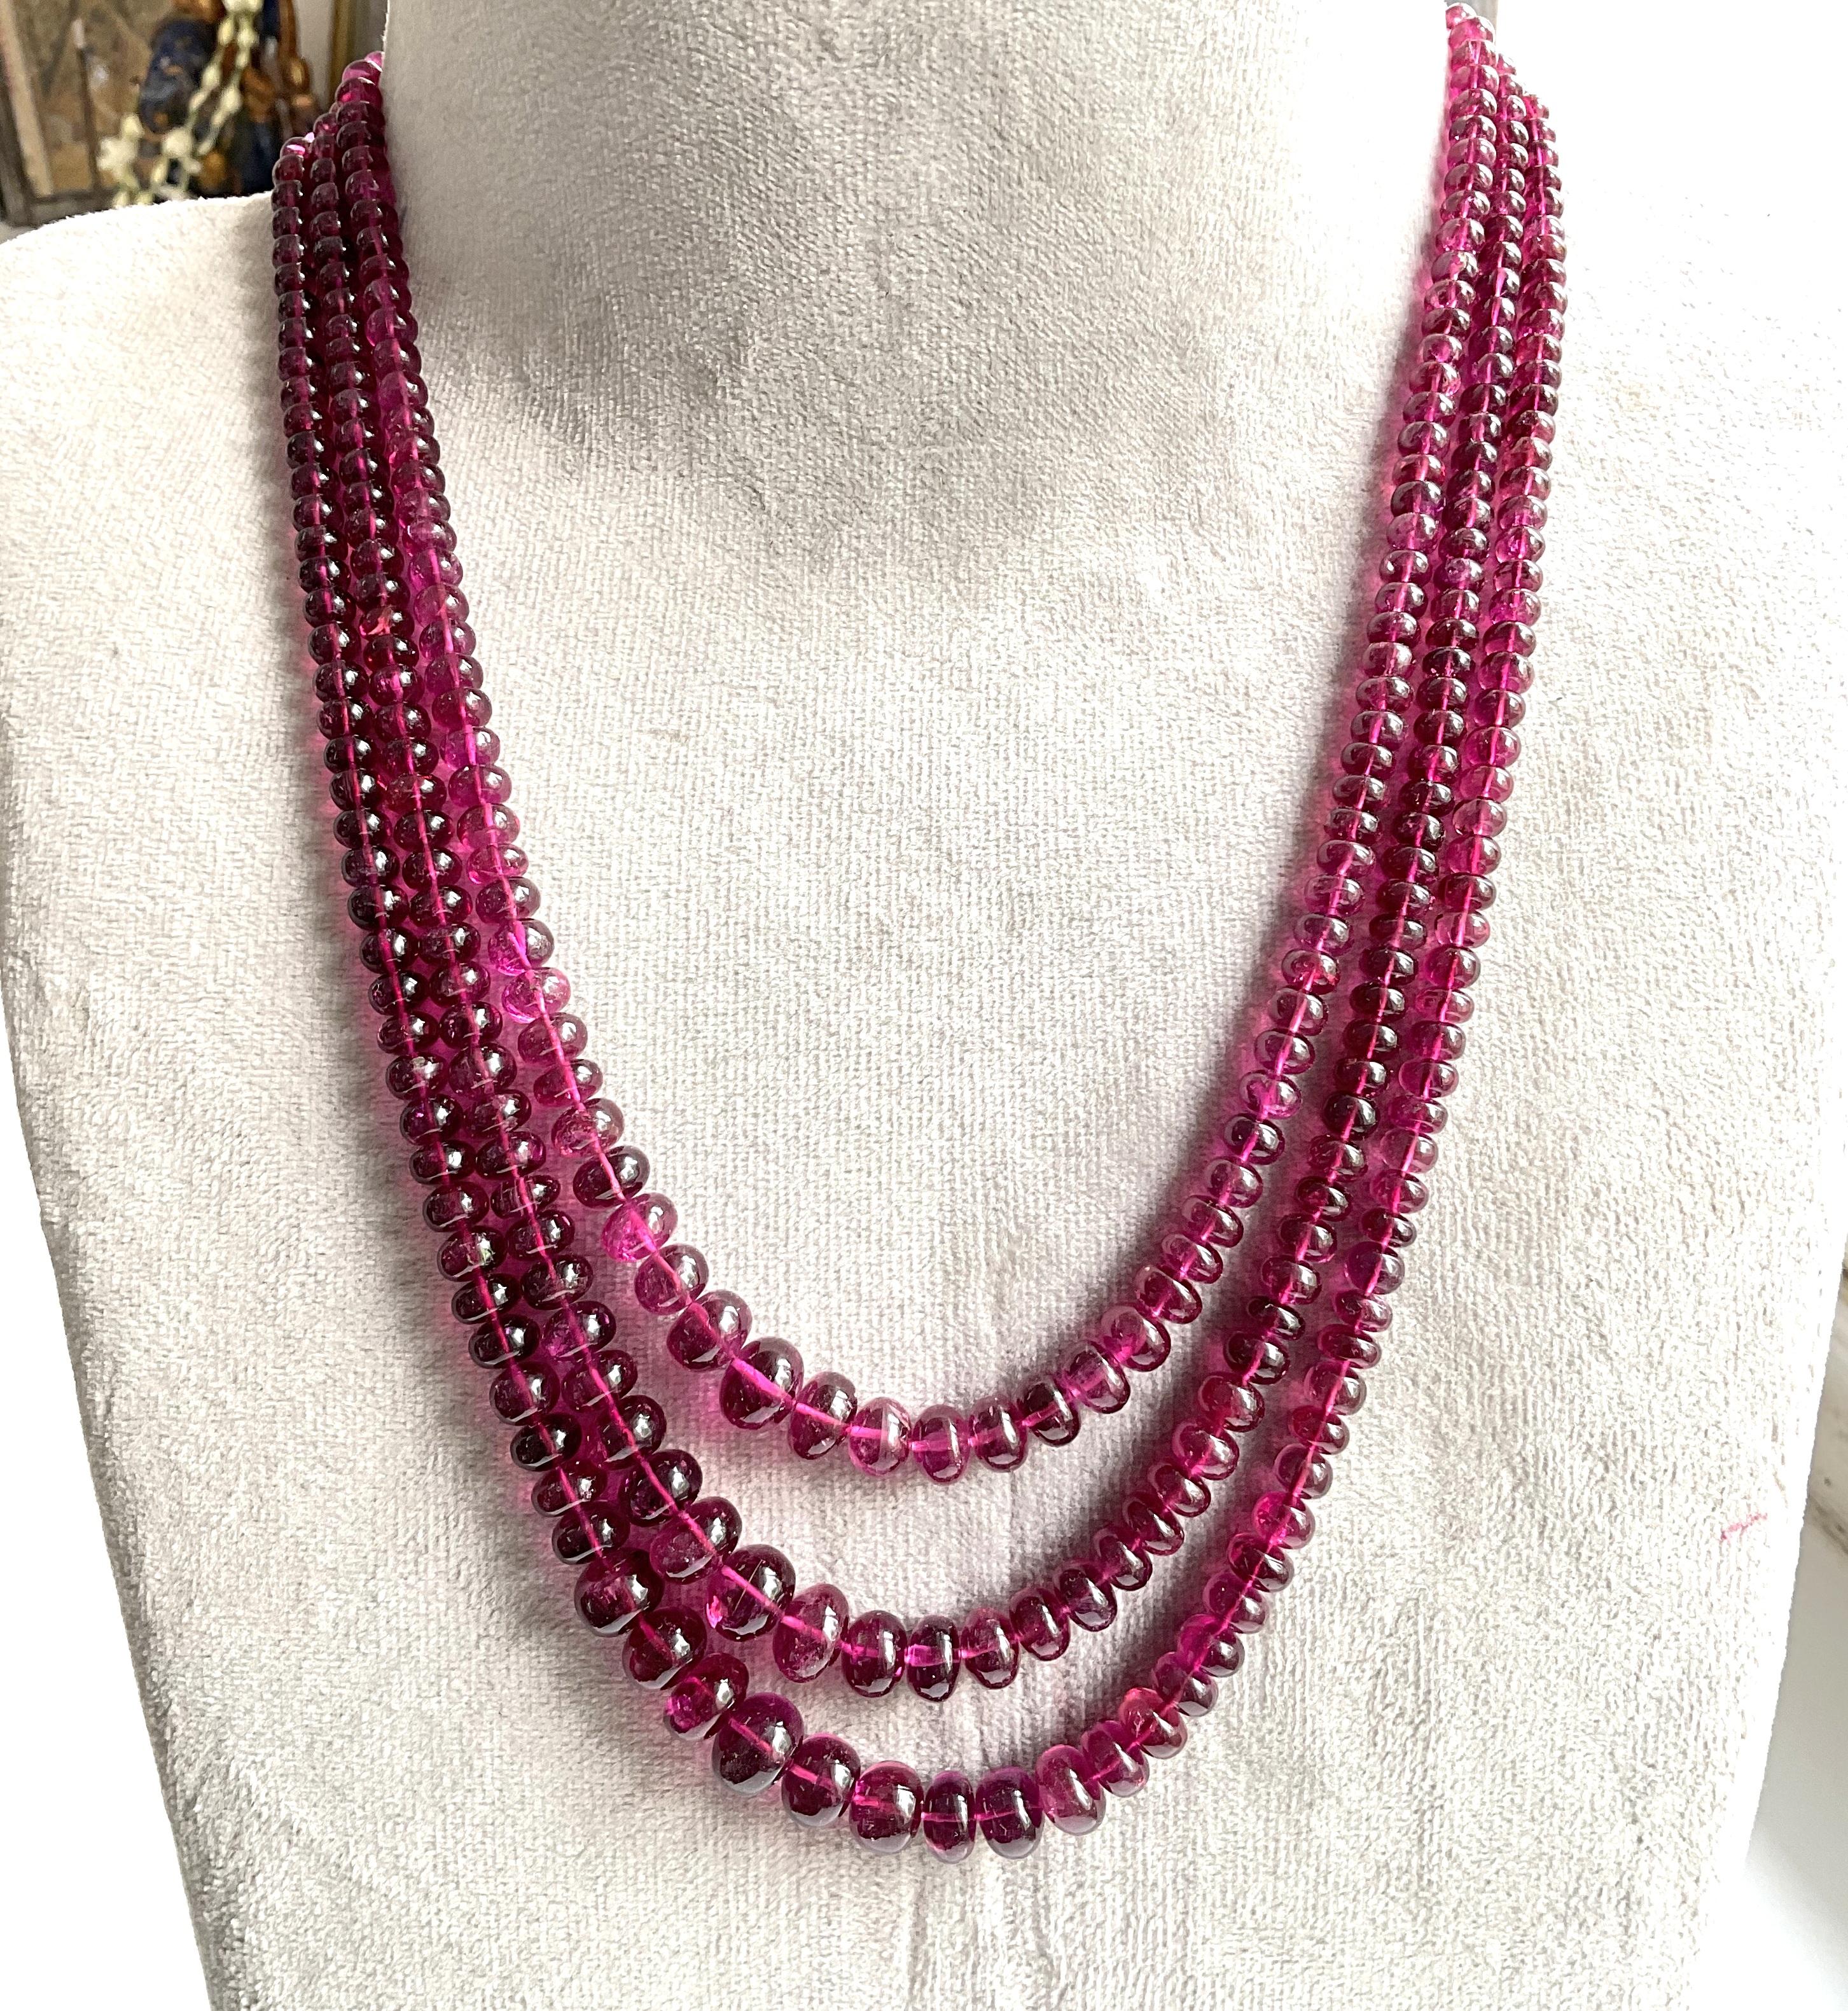 510.00 Carats Top Quality Rubellite Tourmaline Plain Beads Natural Gemstone For Sale 2